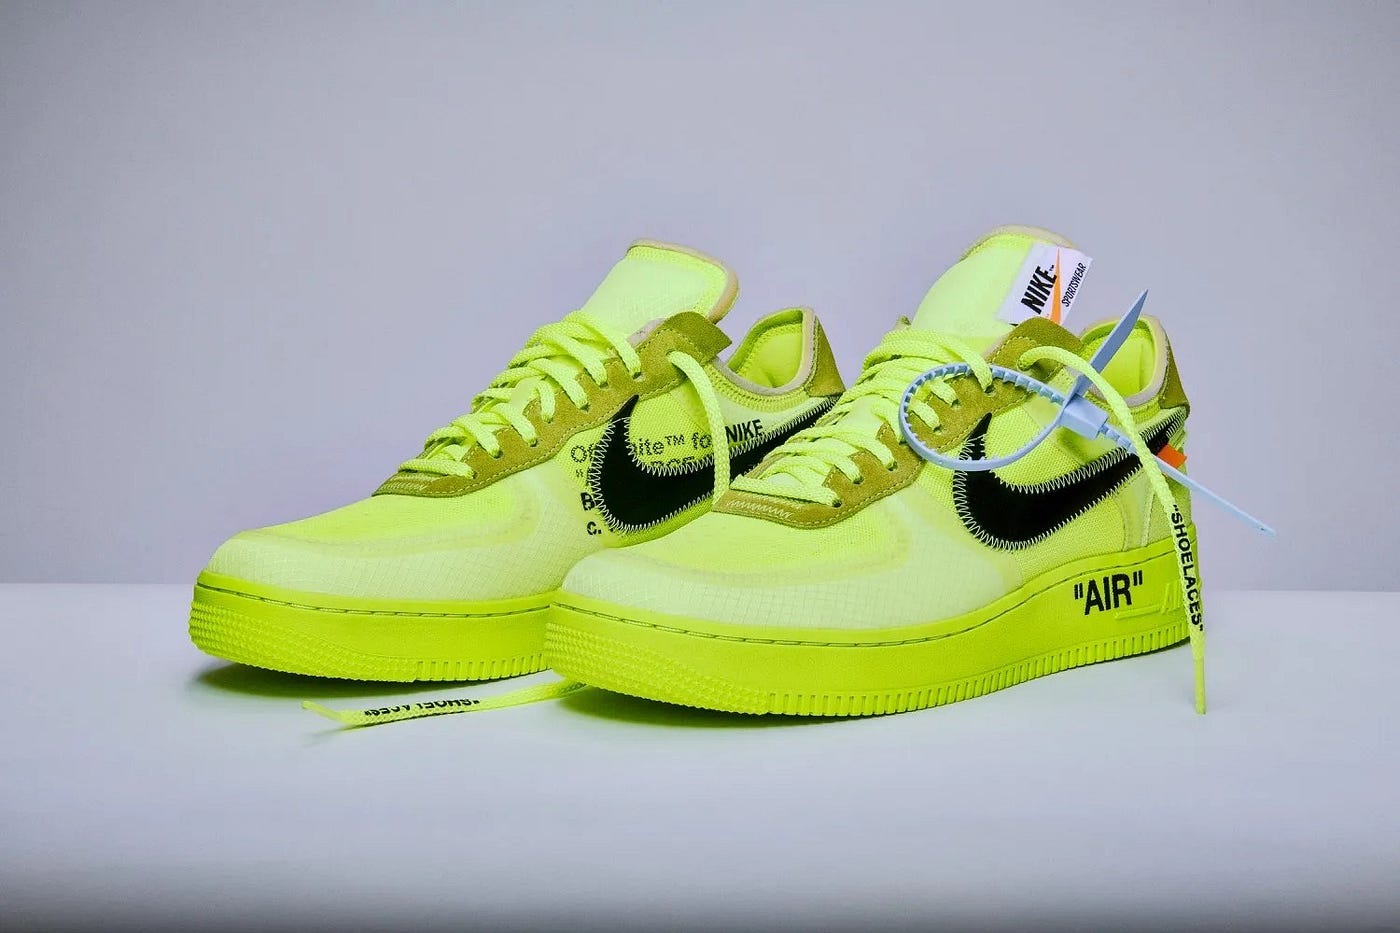 What you rate the OFF-WHITE Air Force 1 Sail from the TEN Collection?